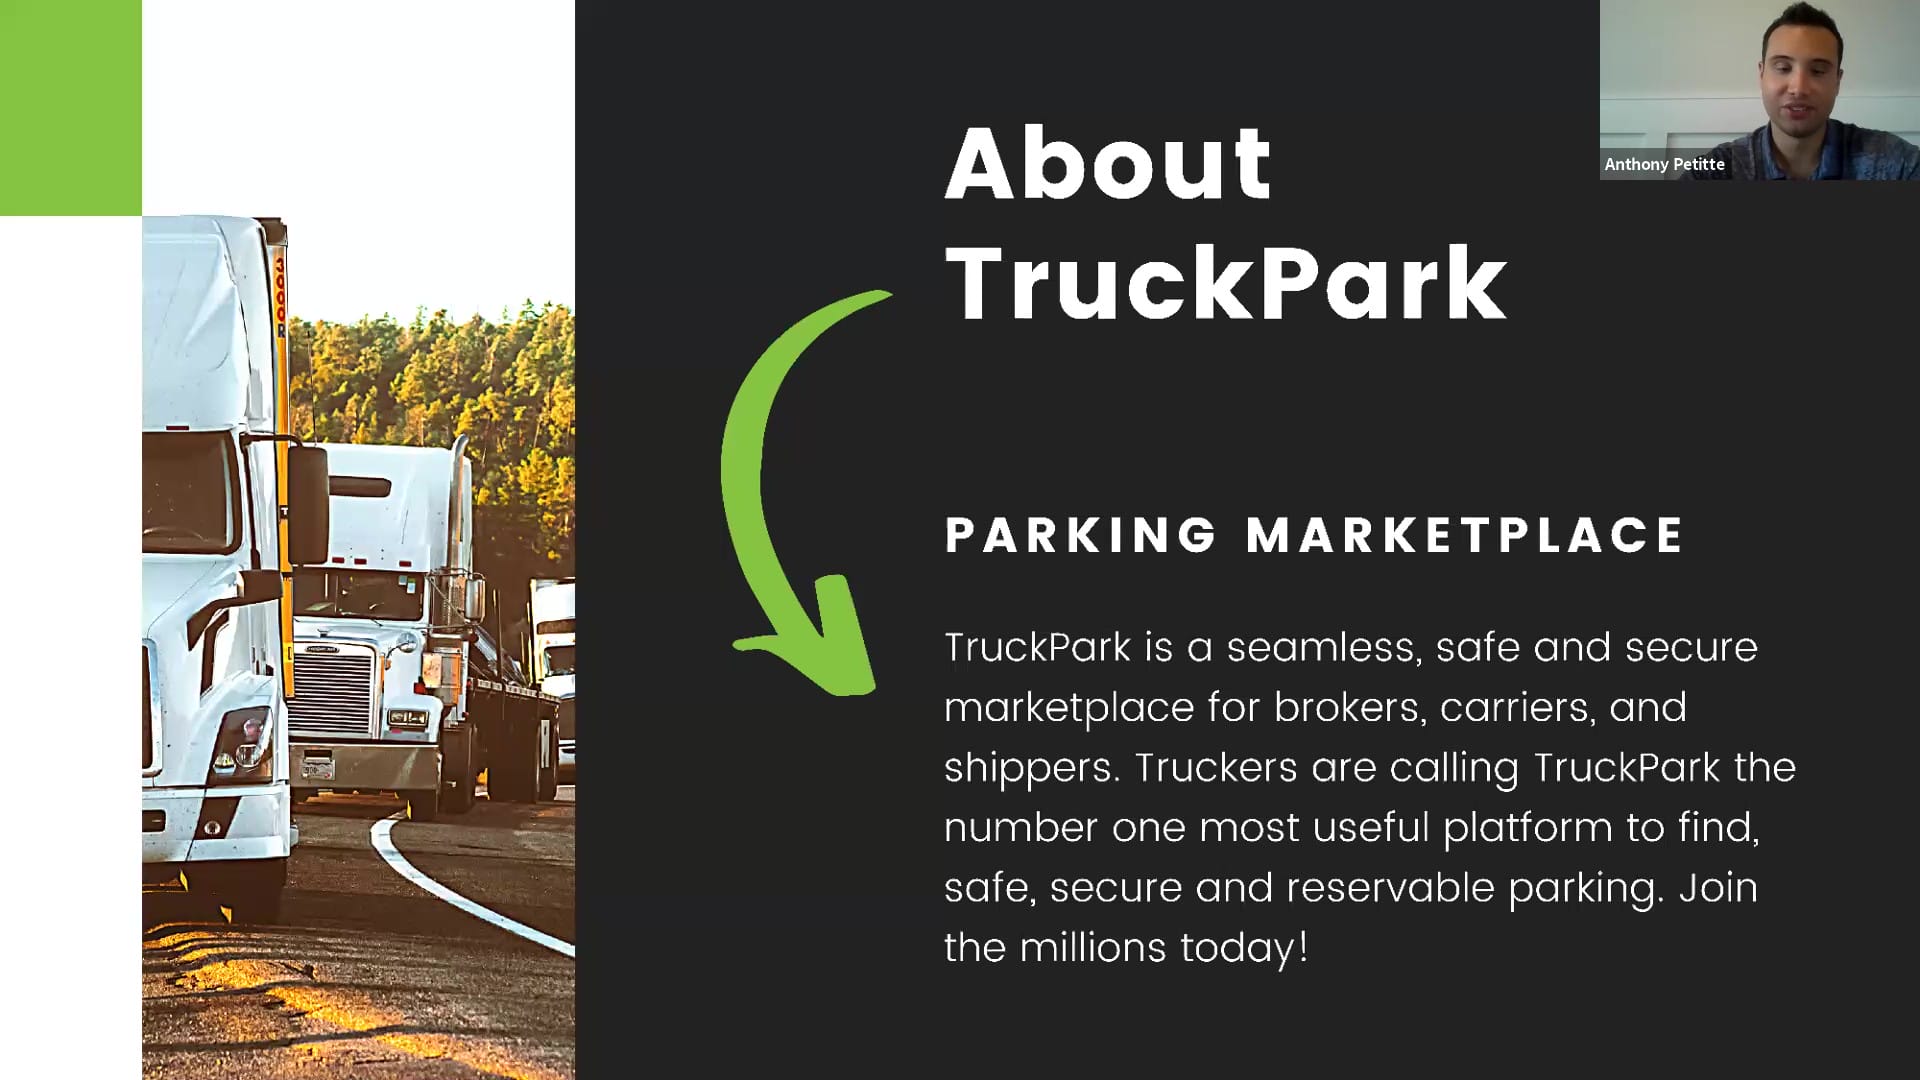 Truck Drivers Safe Parking is a Top Challenge Parking Marketplace